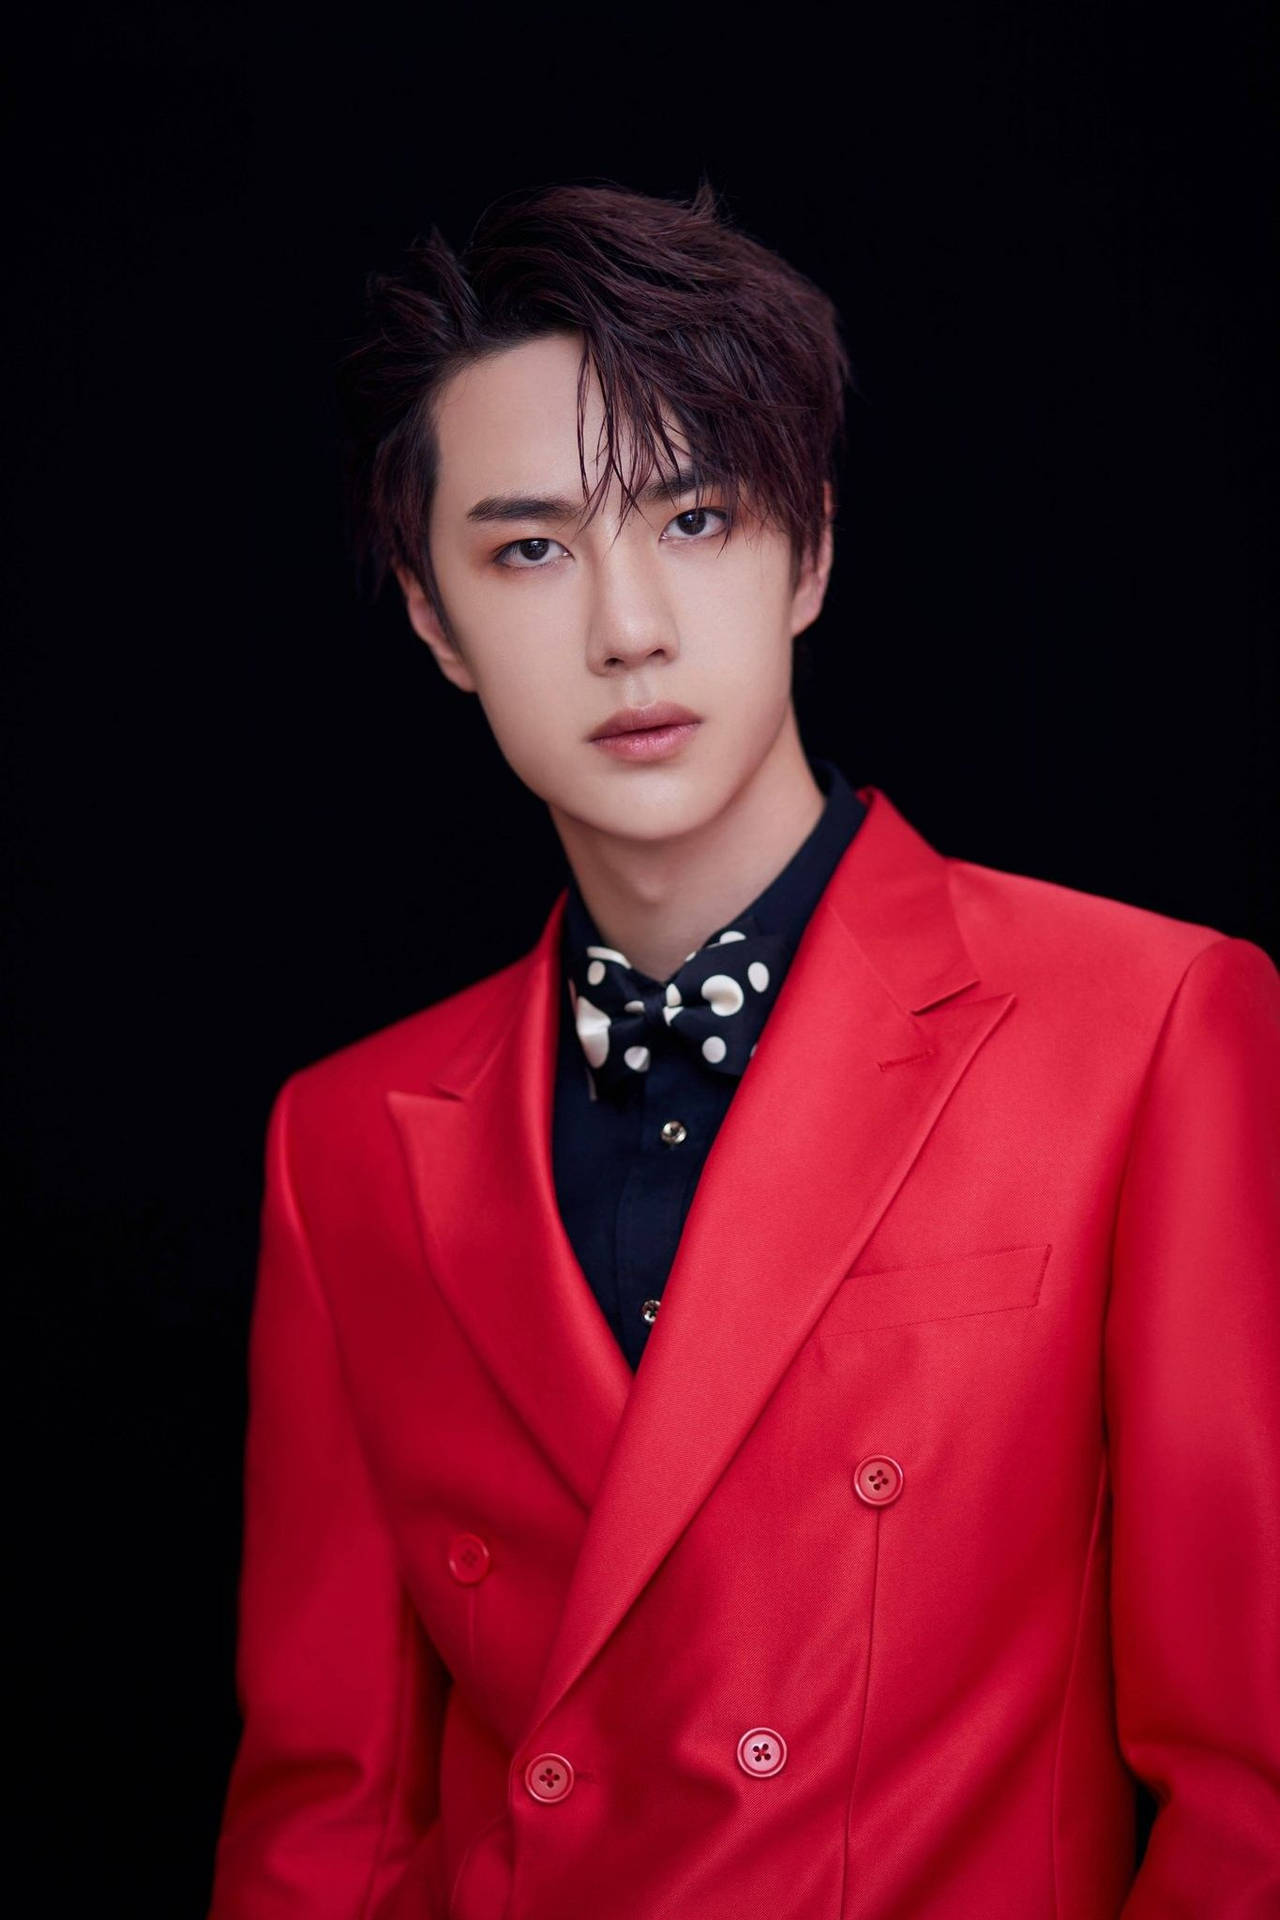 Chinese Actor Wang Yibo In A Stunning Red Outfit On The Set Of Produce 101.